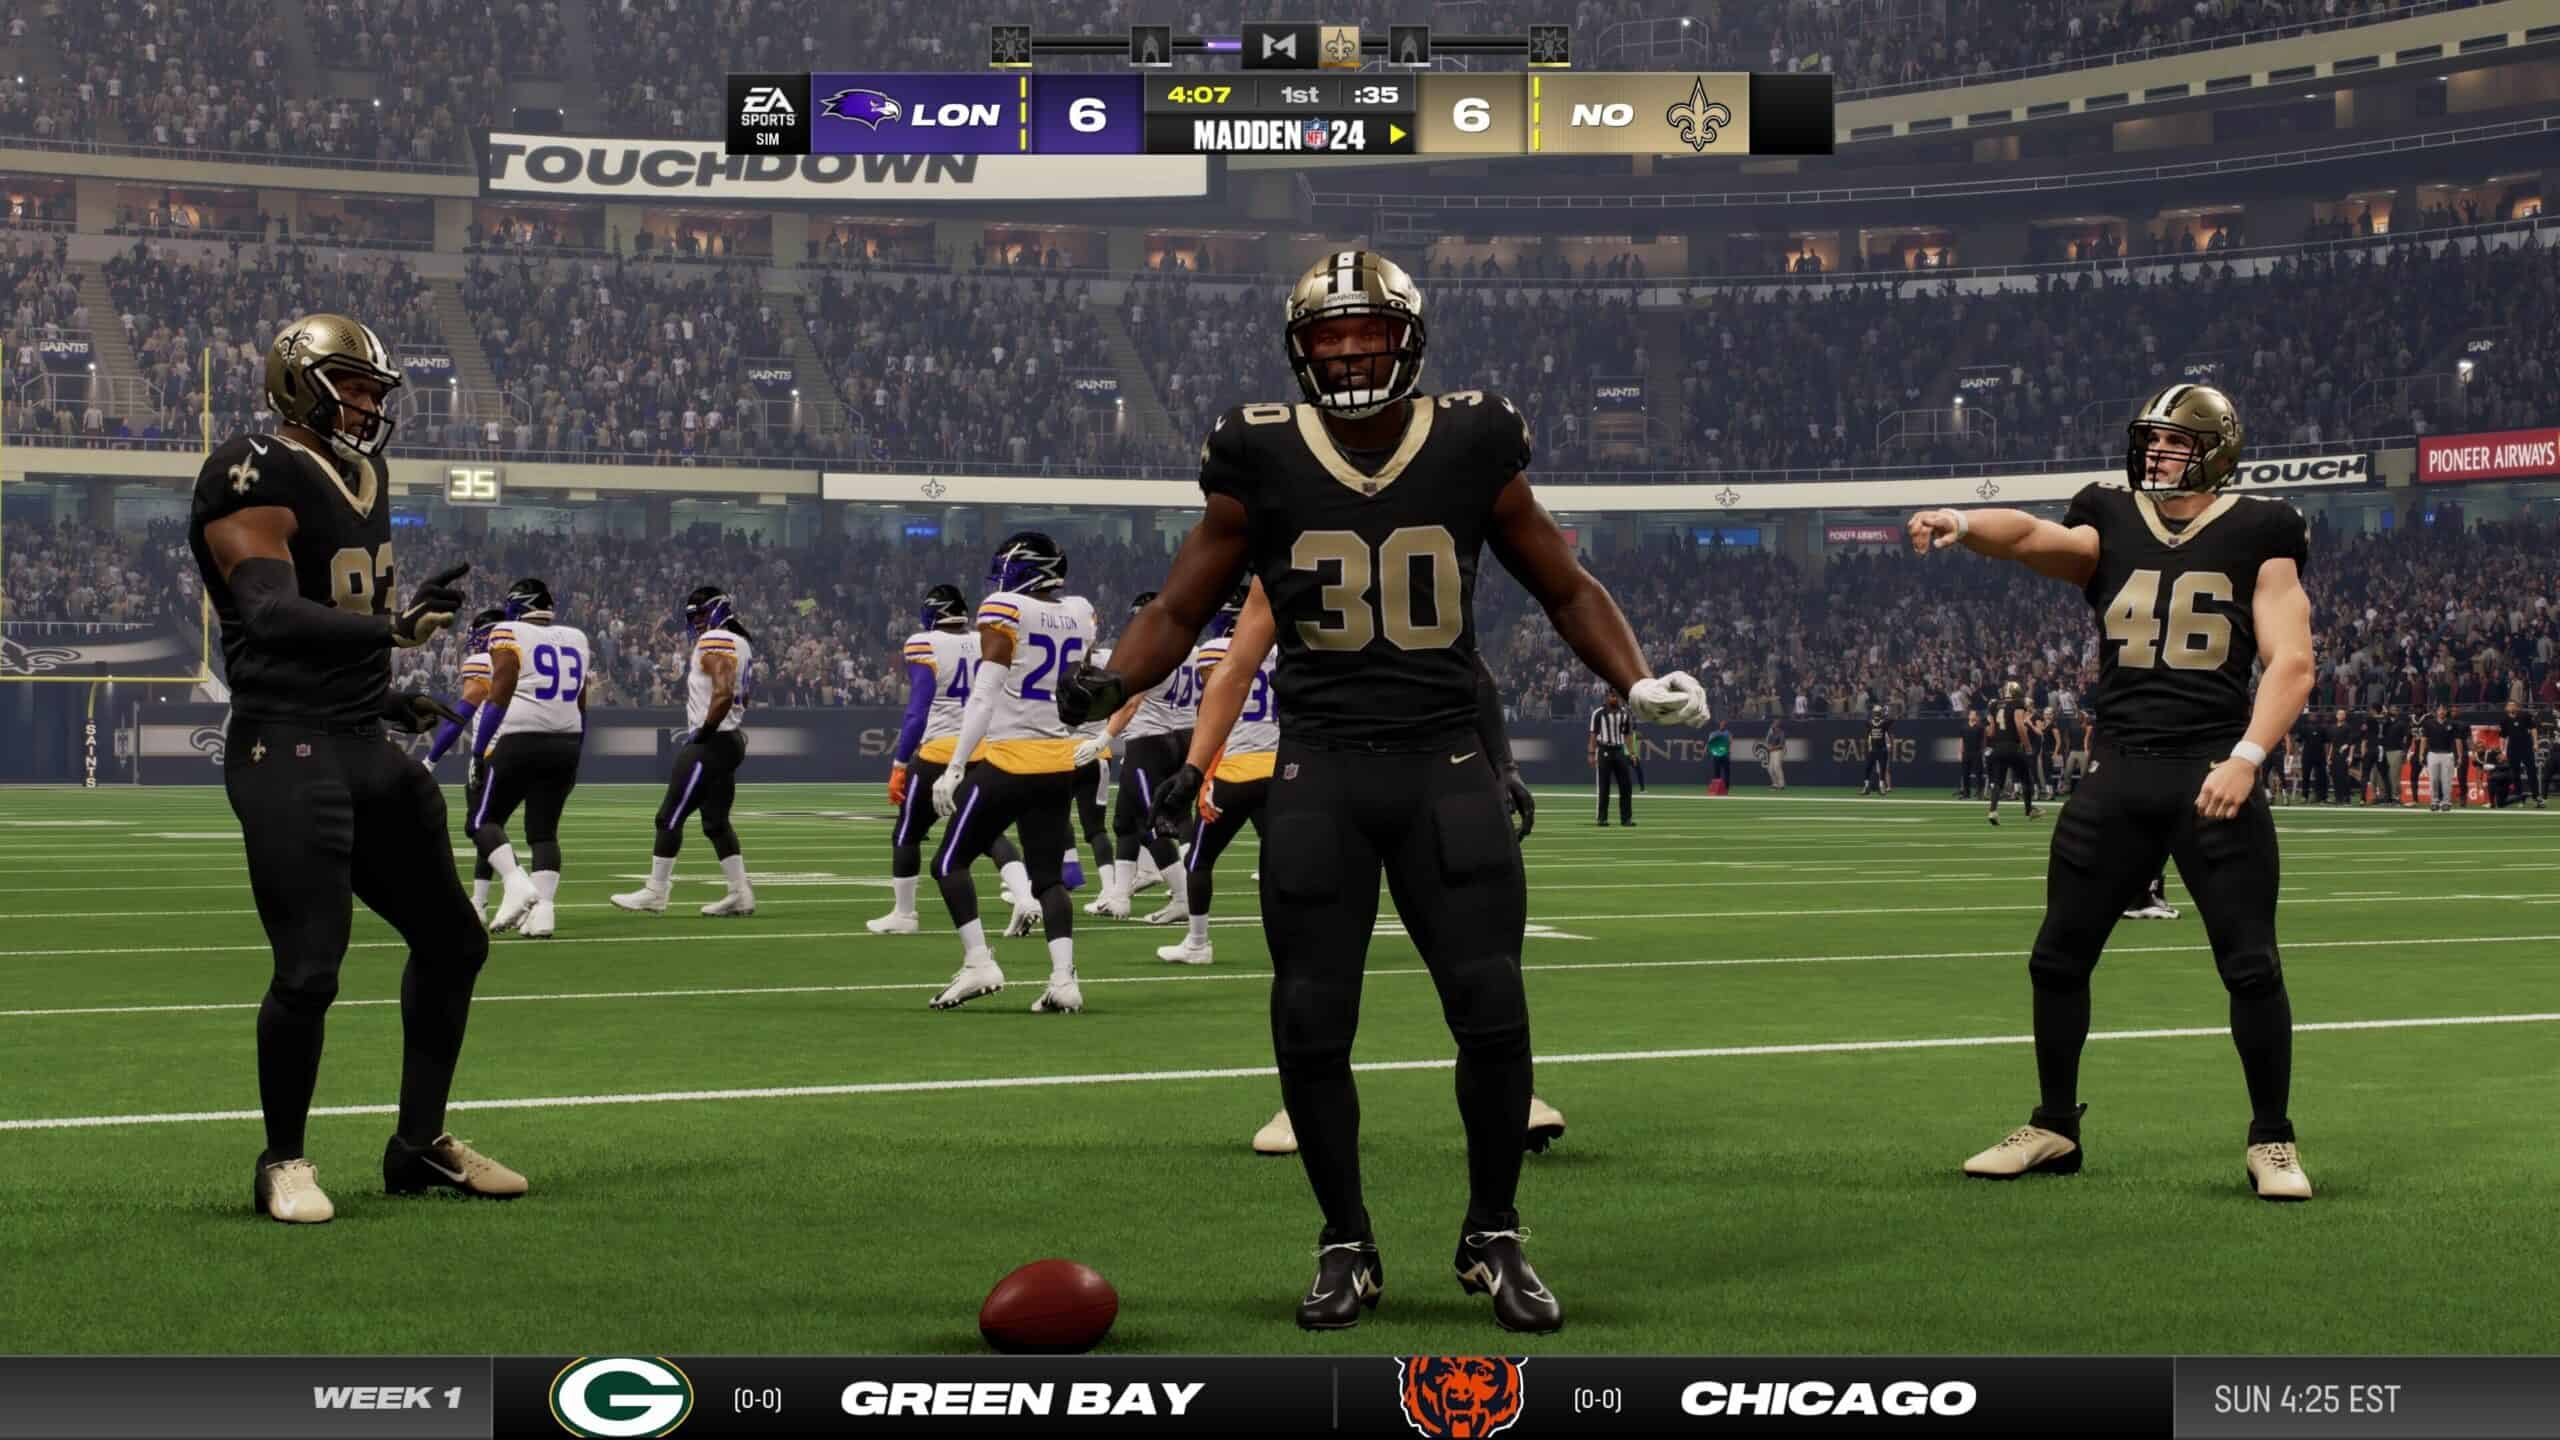 How to showboat in Madden 24